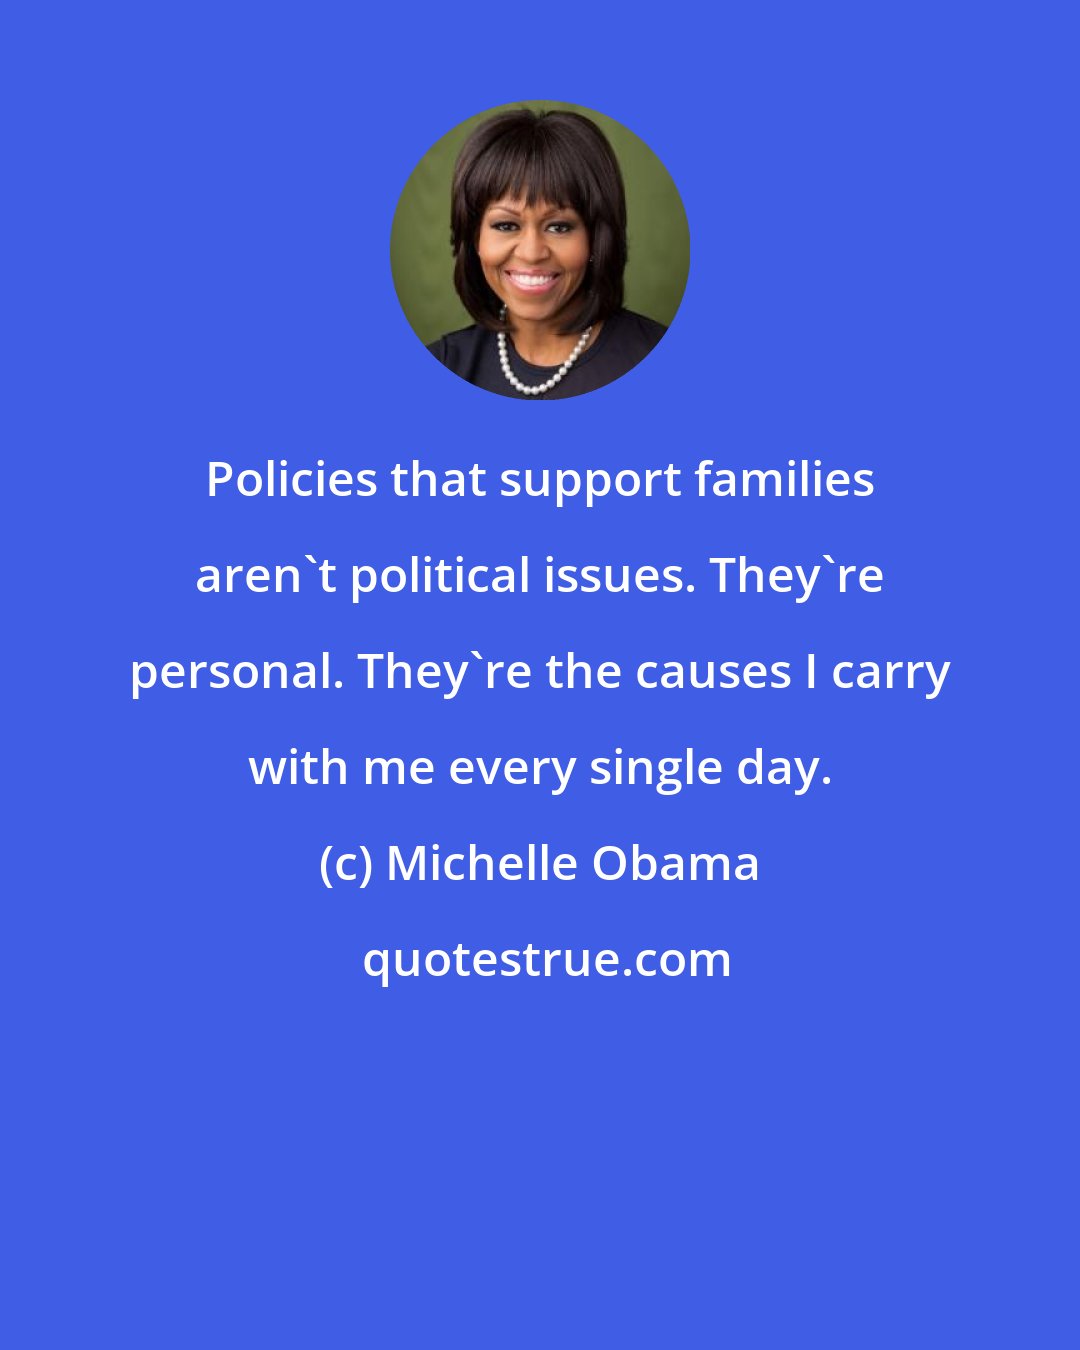 Michelle Obama: Policies that support families aren't political issues. They're personal. They're the causes I carry with me every single day.